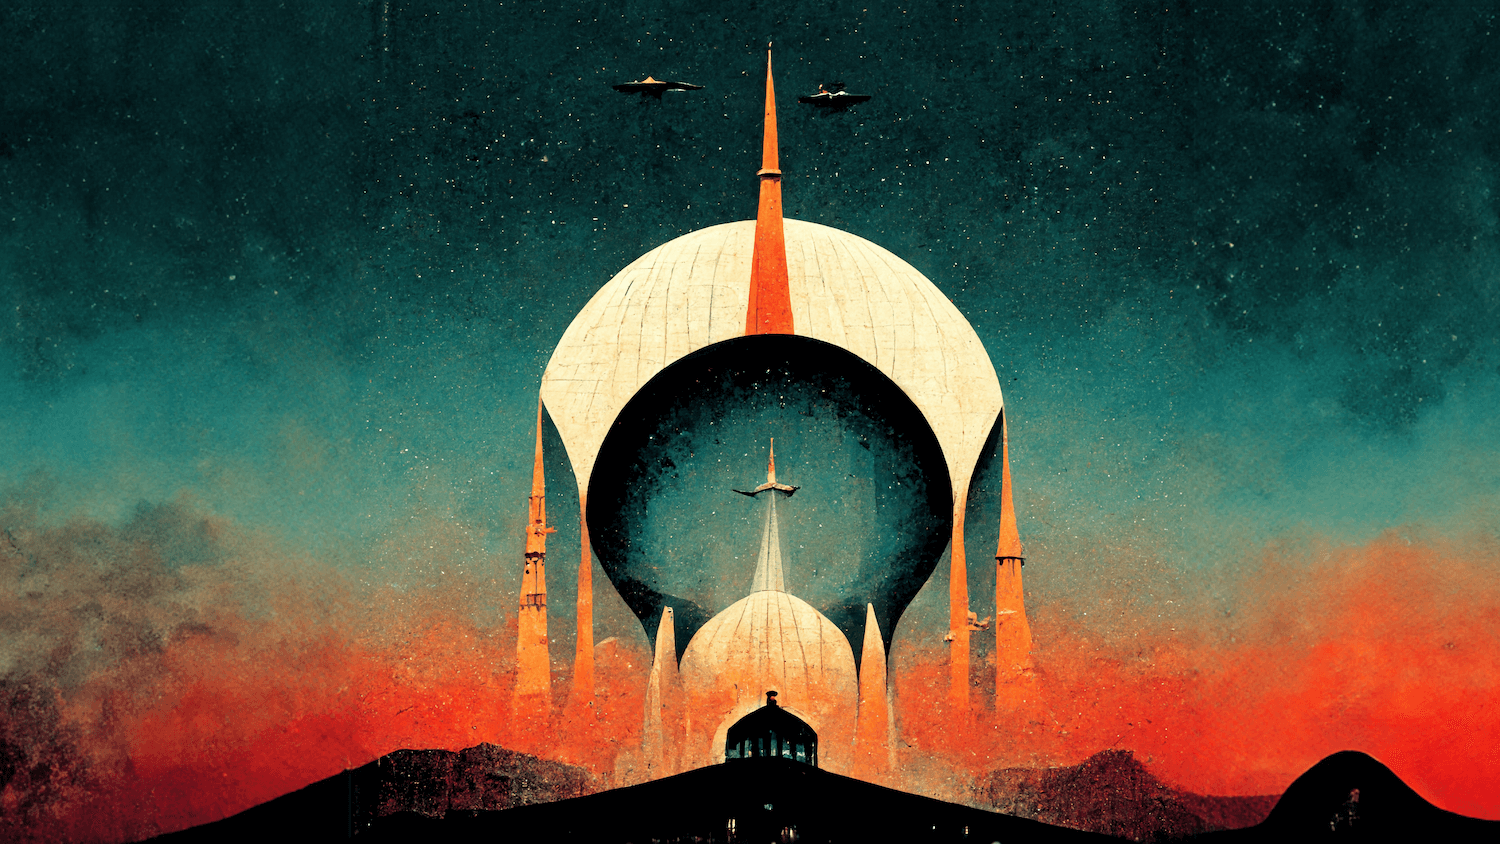 Mid Journey art created by Marc Manley - Islamic futurism